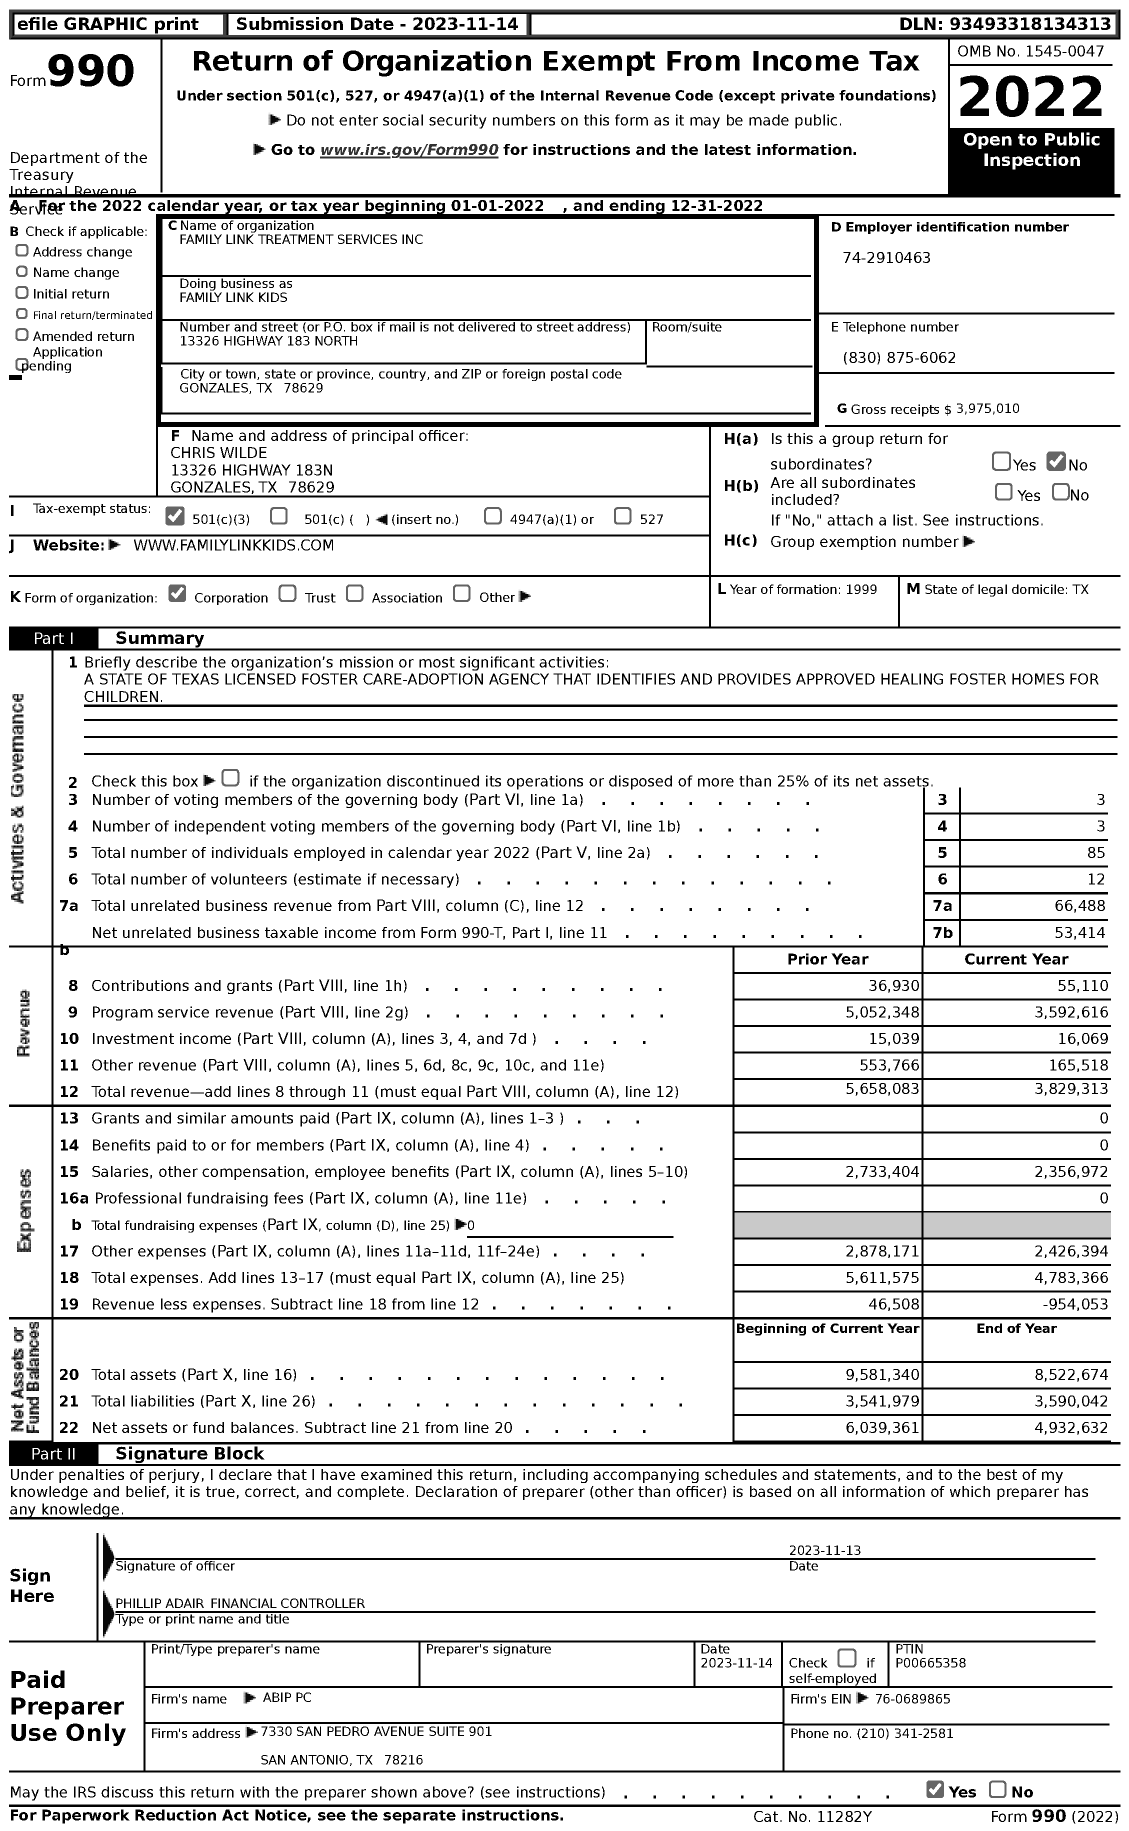 Image of first page of 2022 Form 990 for Family Link Kids